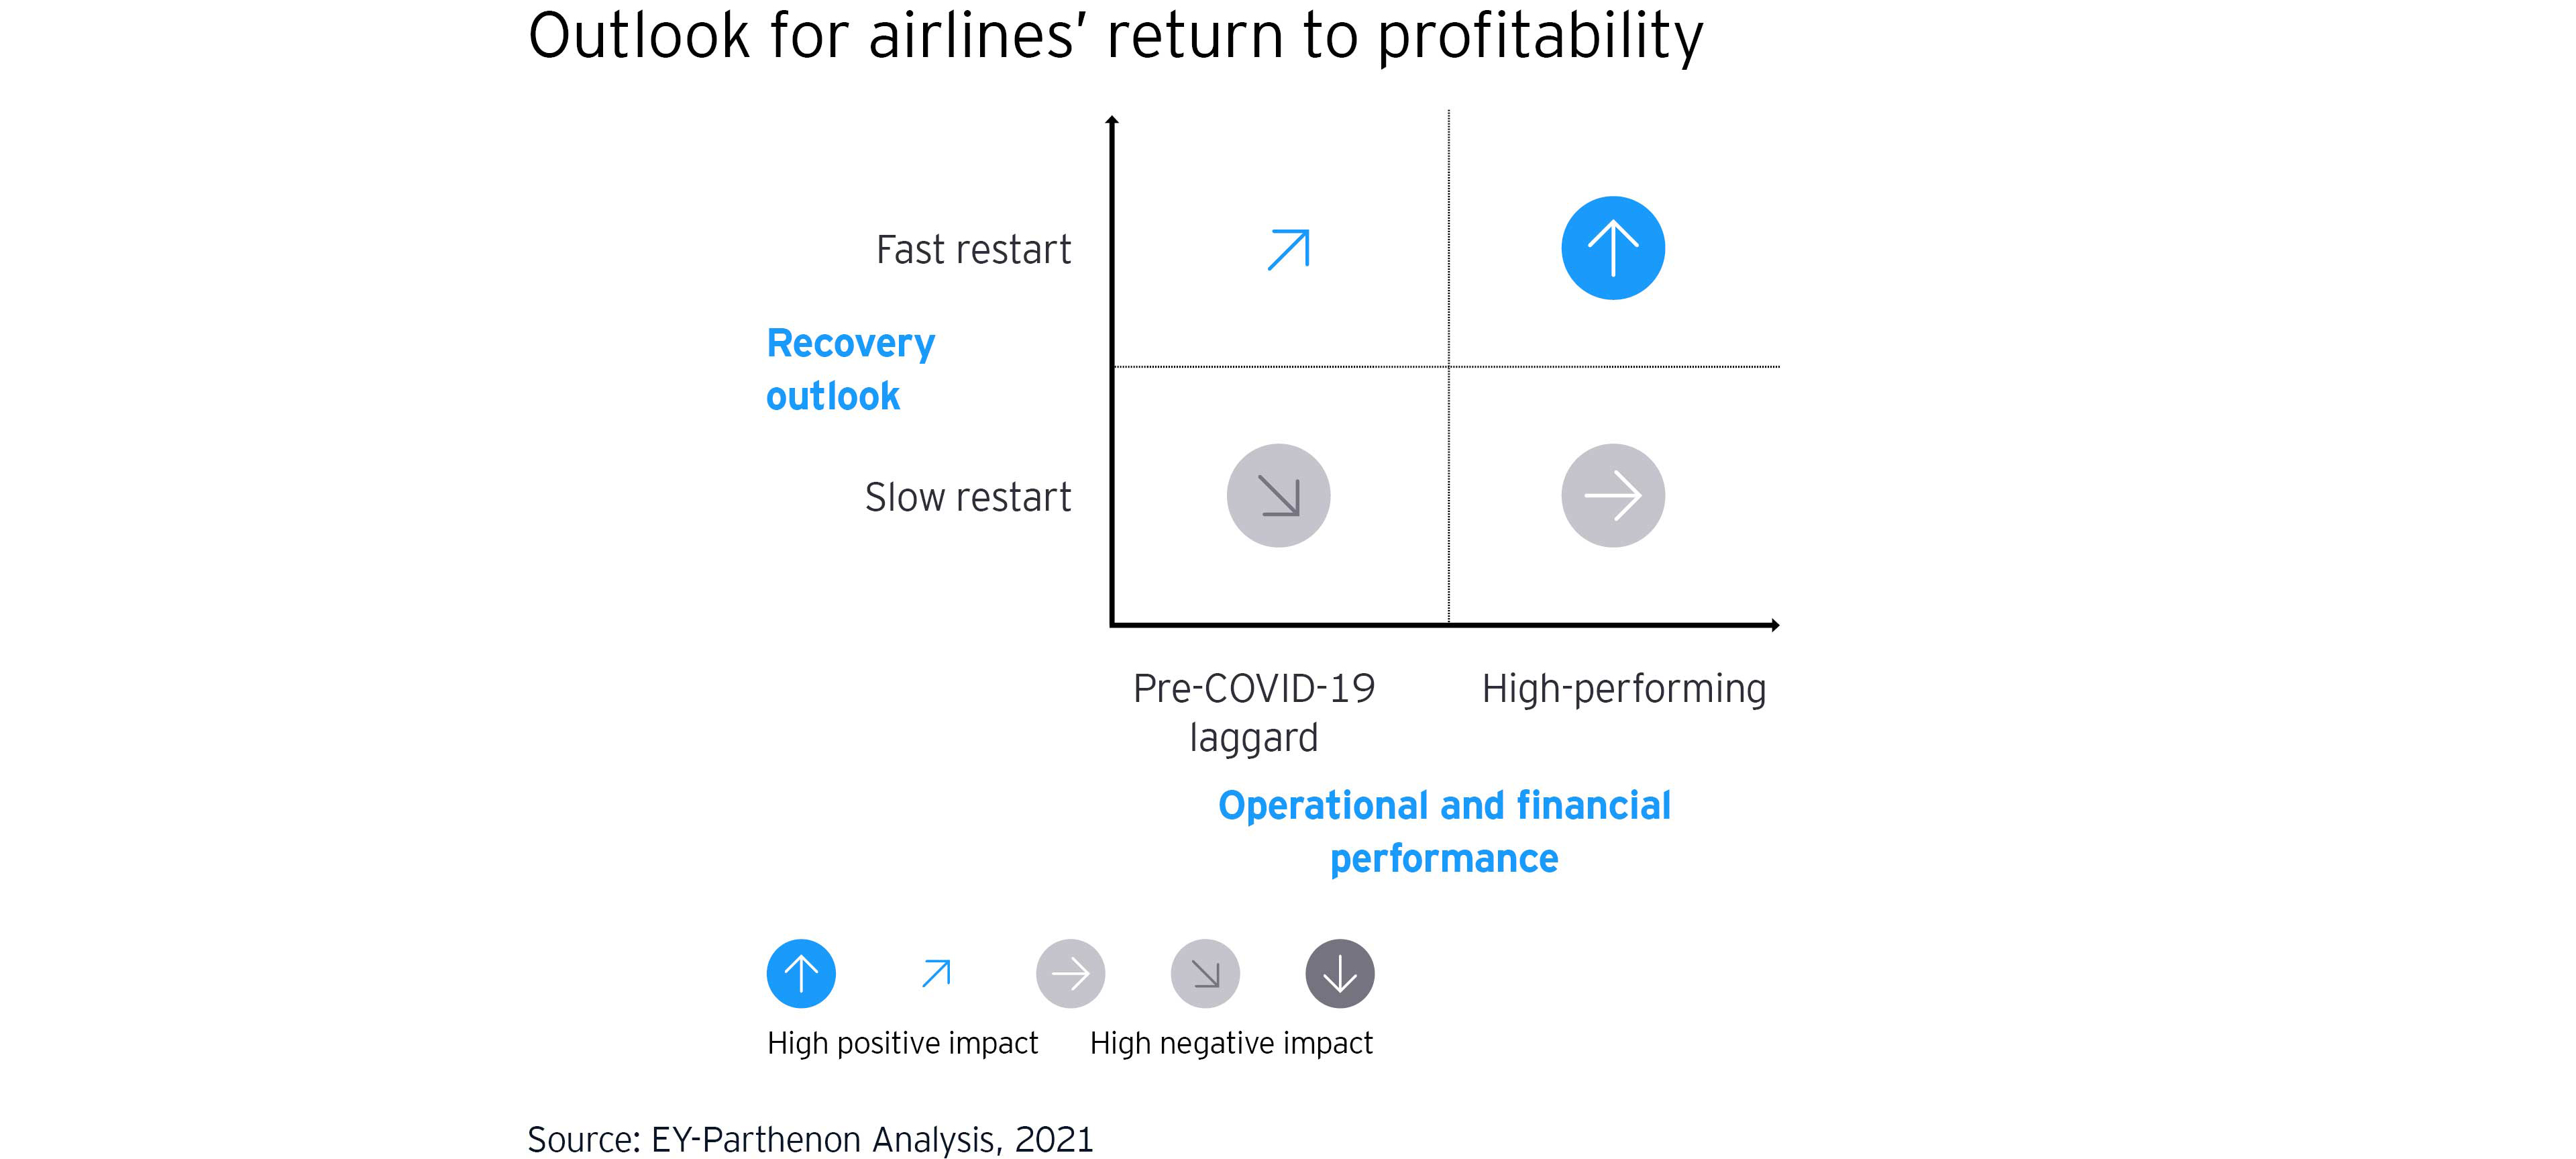 Outlook for airlines return to profitability